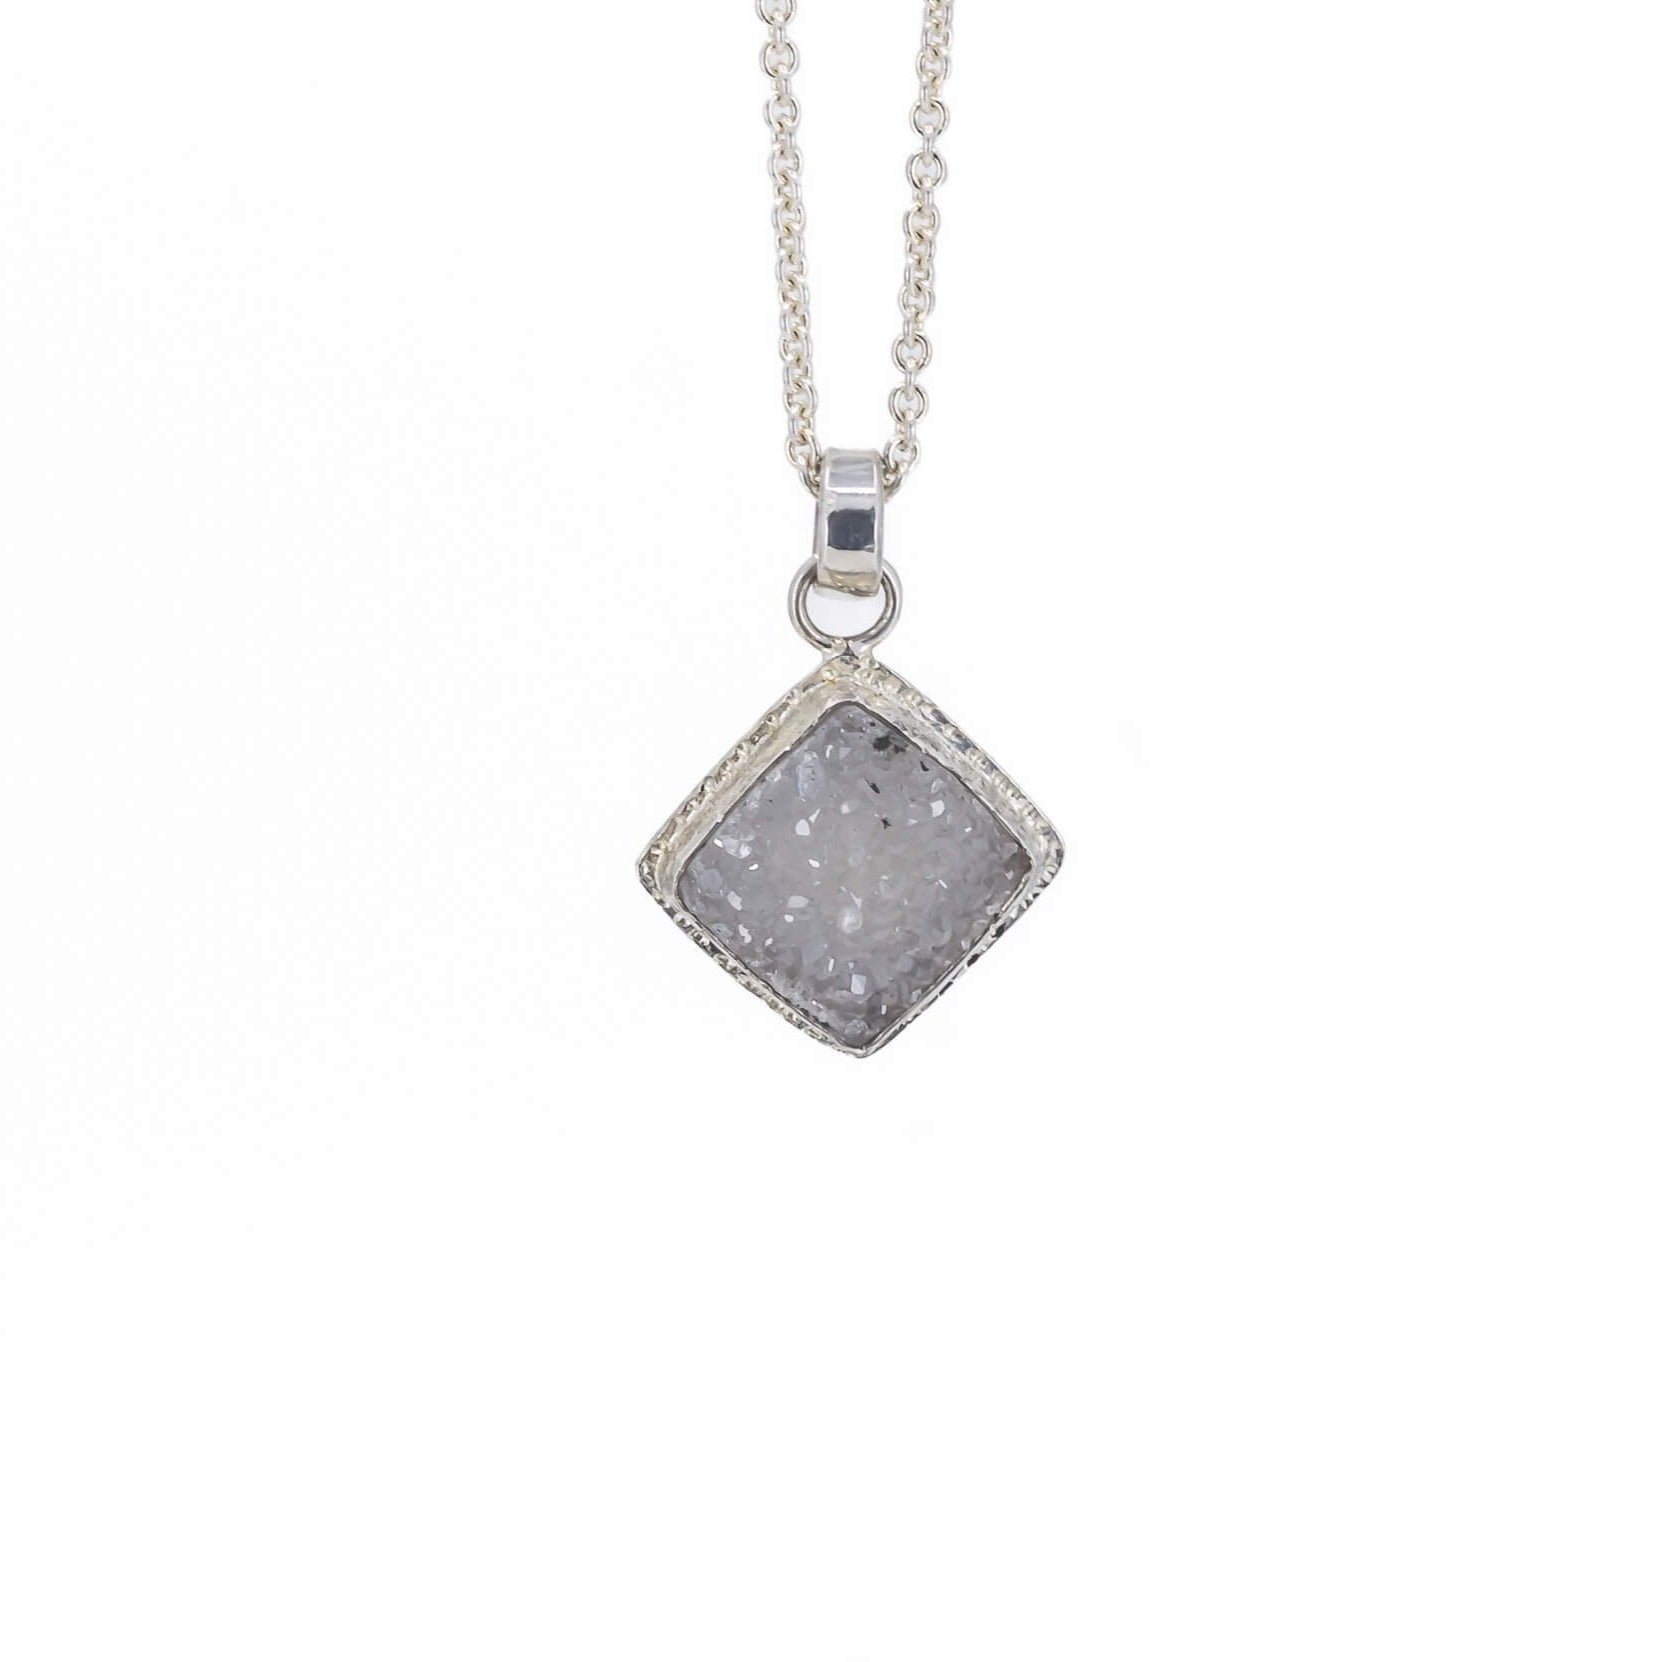 Square lilac druzy pendant necklace in sterling silver